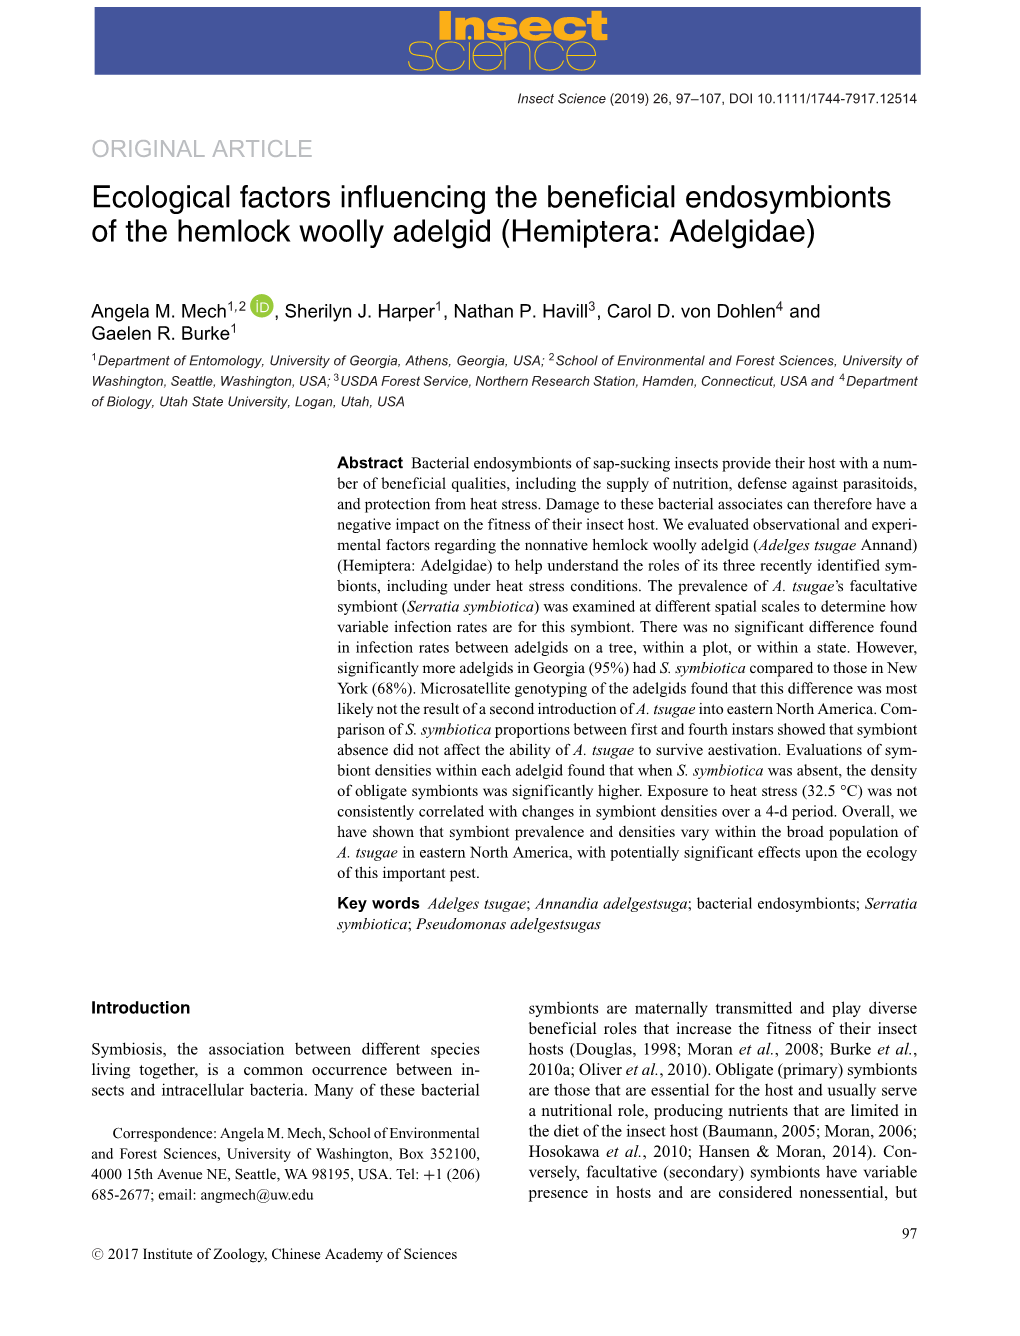 Ecological Factors Influencing the Beneficial Endosymbionts of The